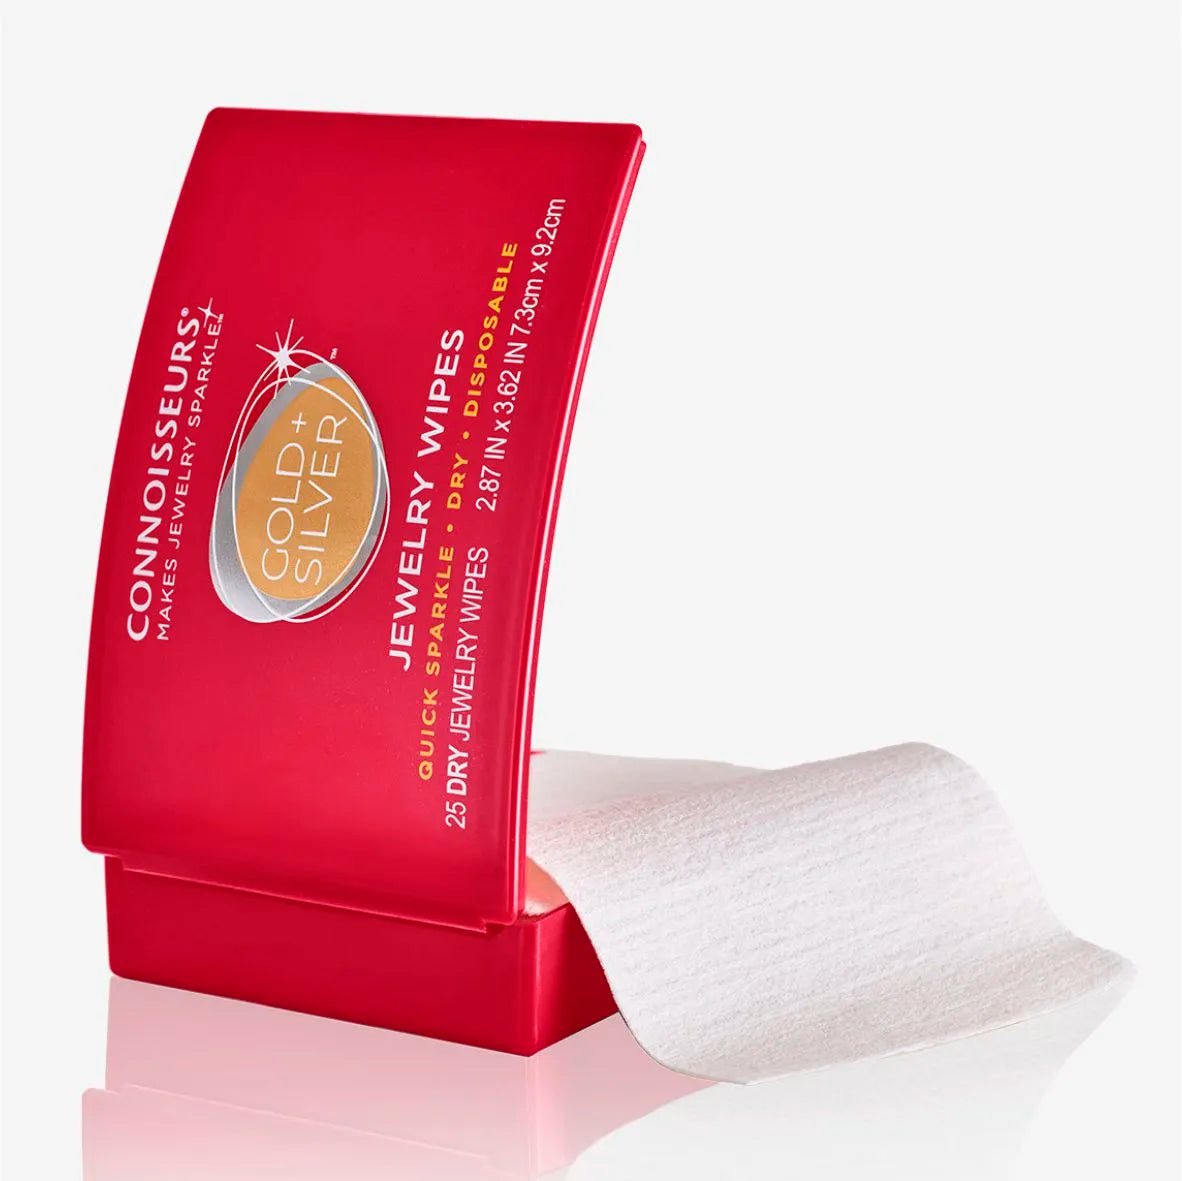 Connoisseurs Jewelry Wipes Gold Silver Platinum Diamond Gemstone Excellent For Watches Cleaning Care maintenance